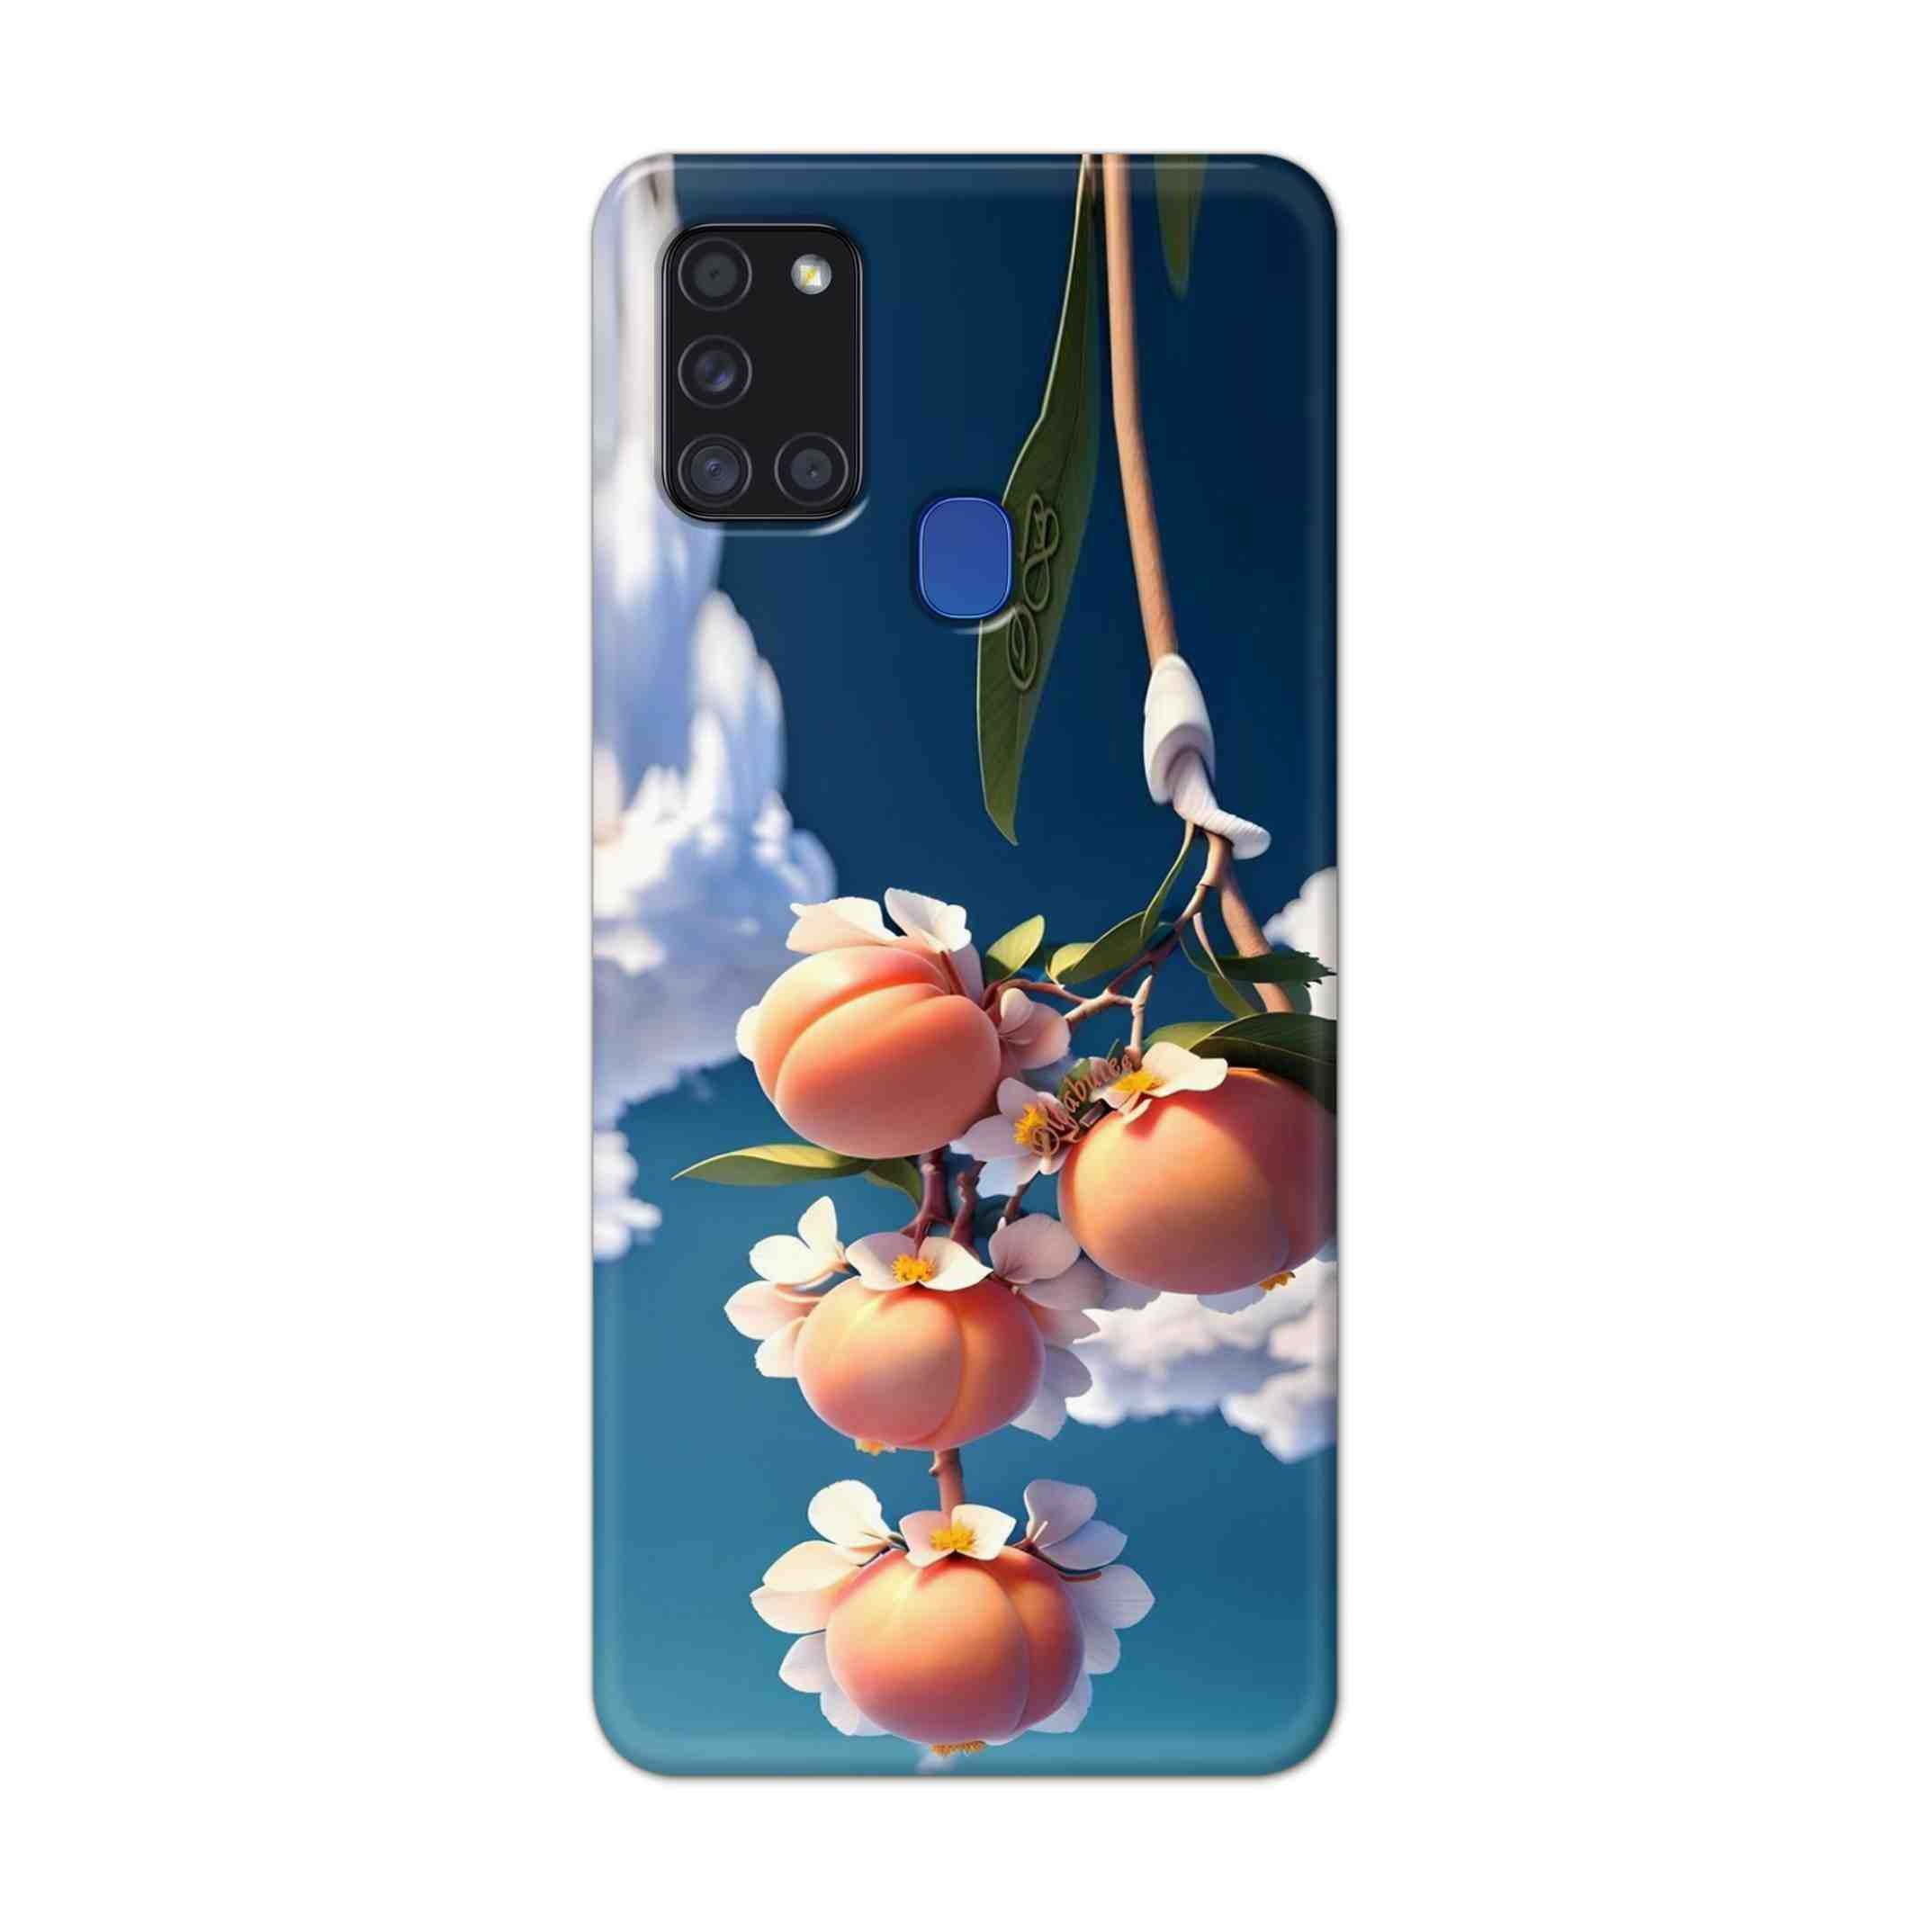 Buy Fruit Hard Back Mobile Phone Case Cover For Samsung Galaxy A21s Online